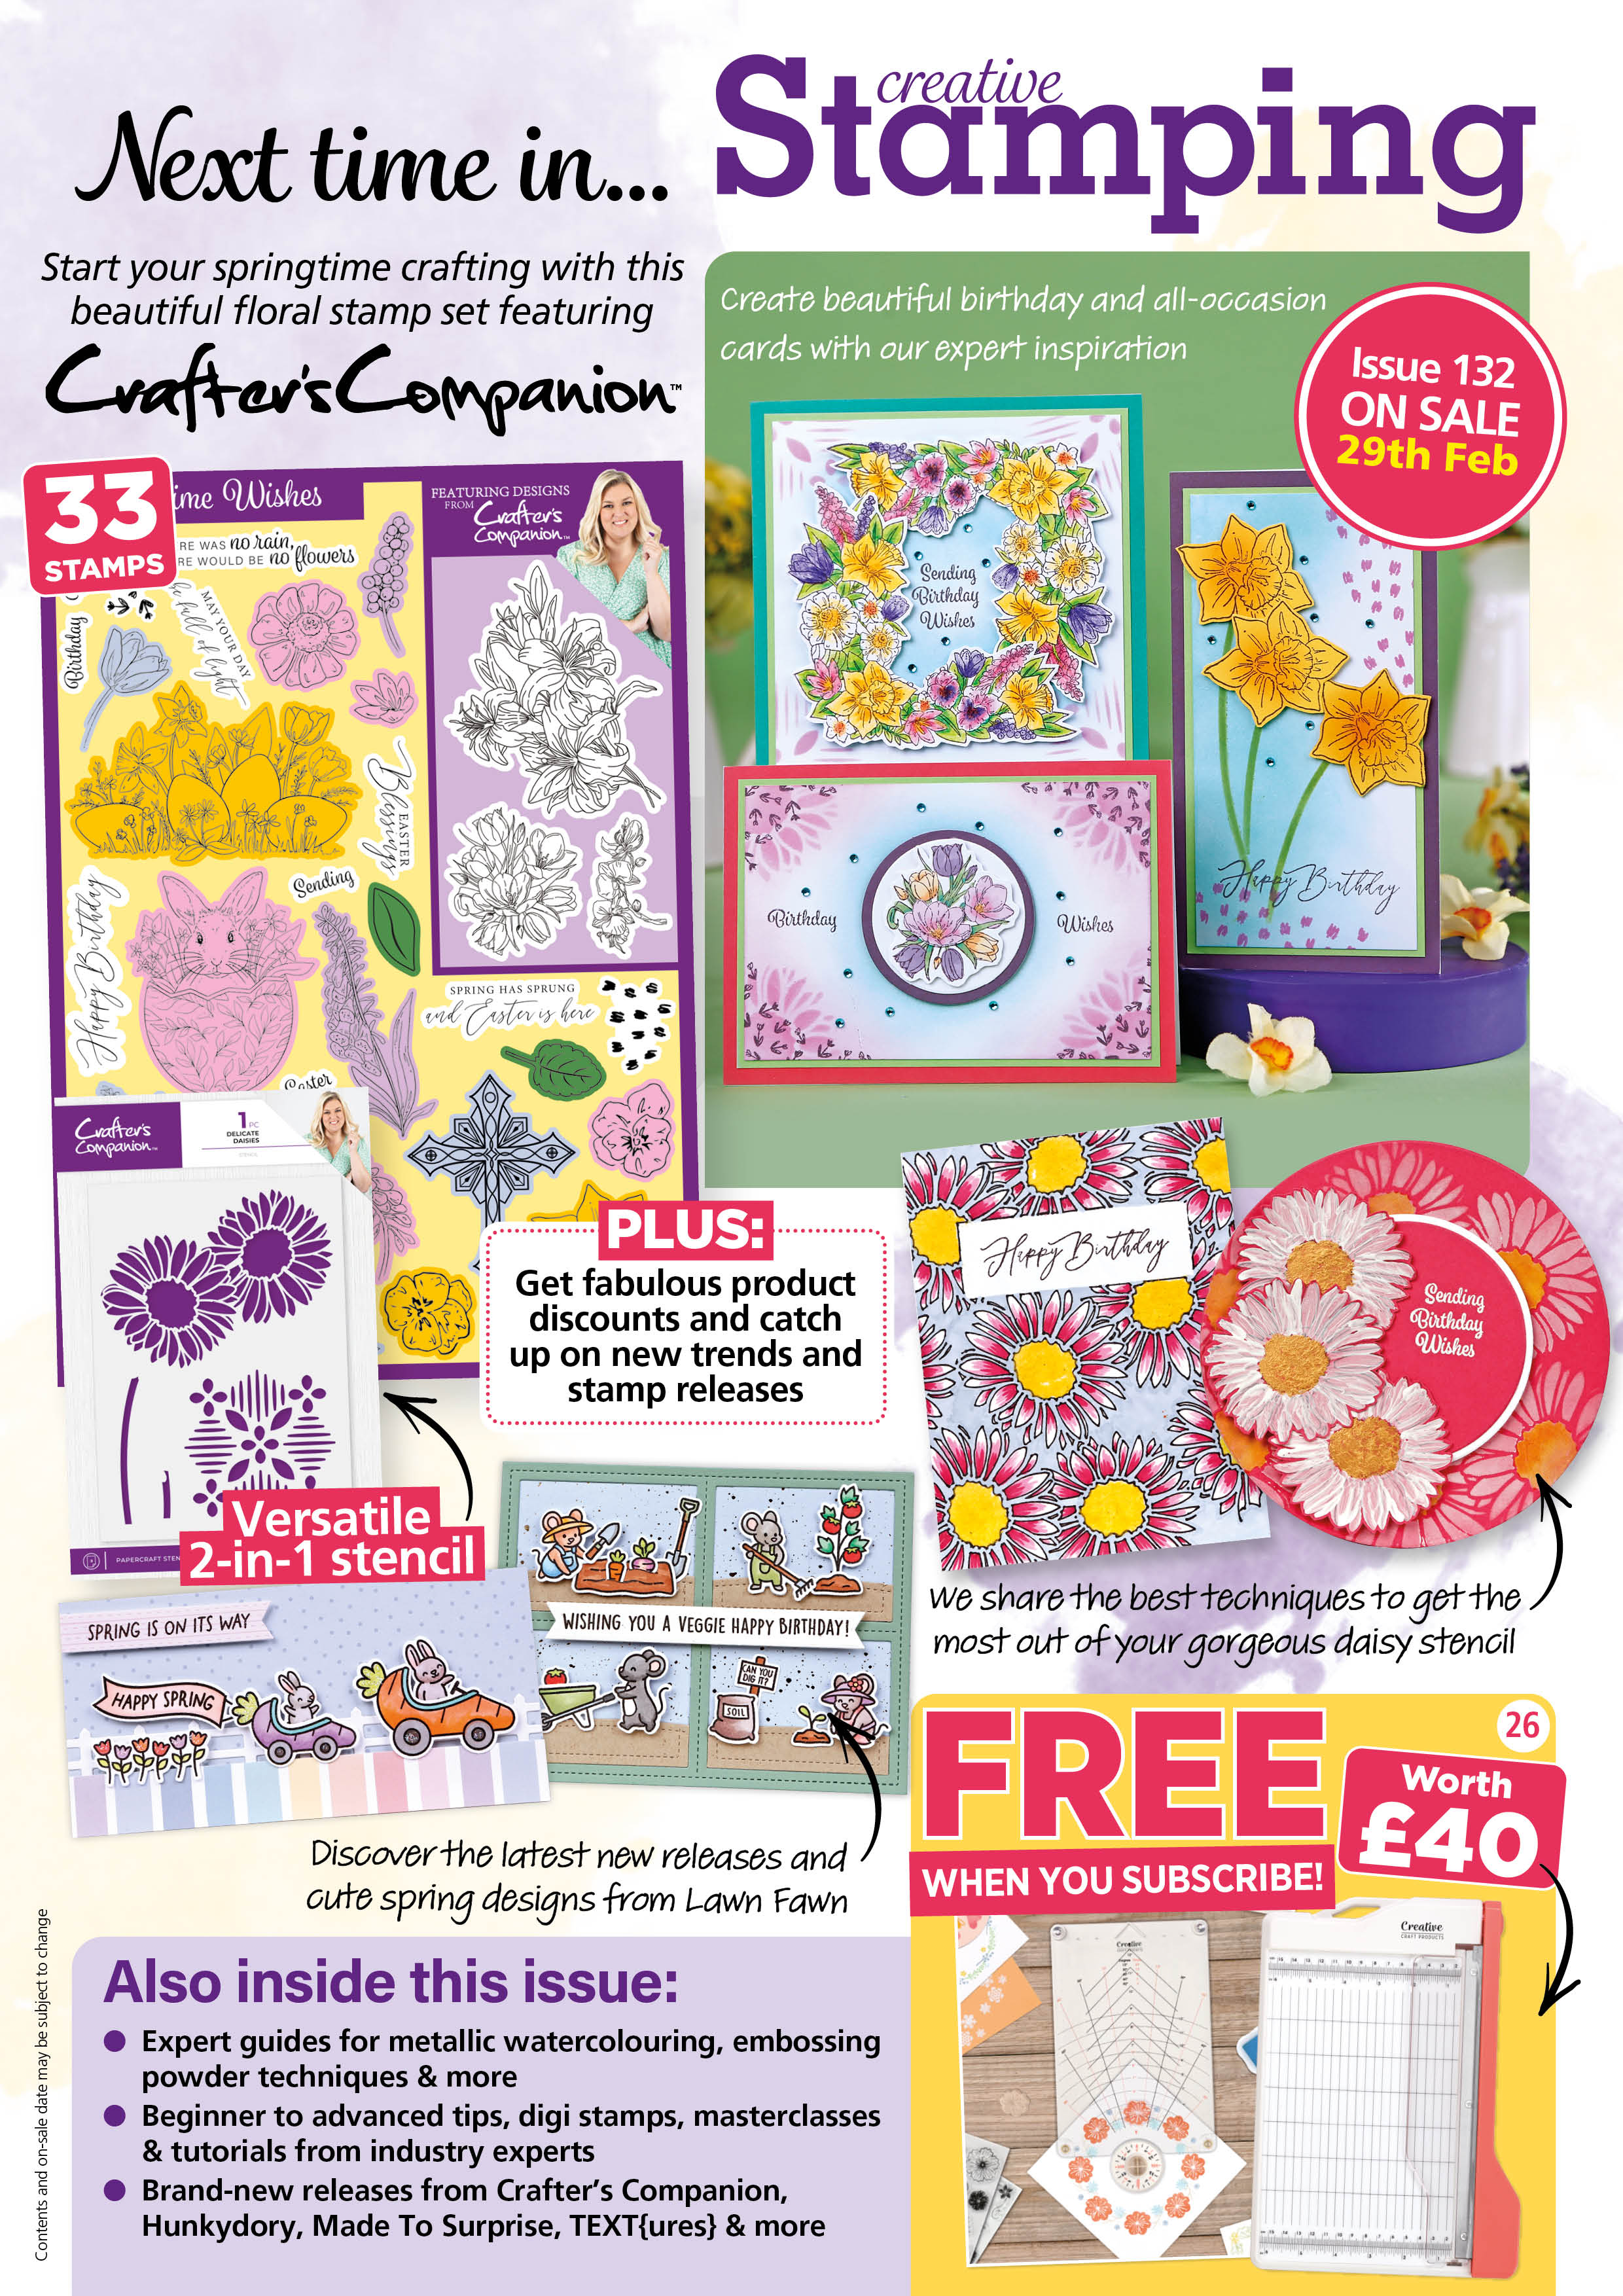 Creative Stamping - Issue 131